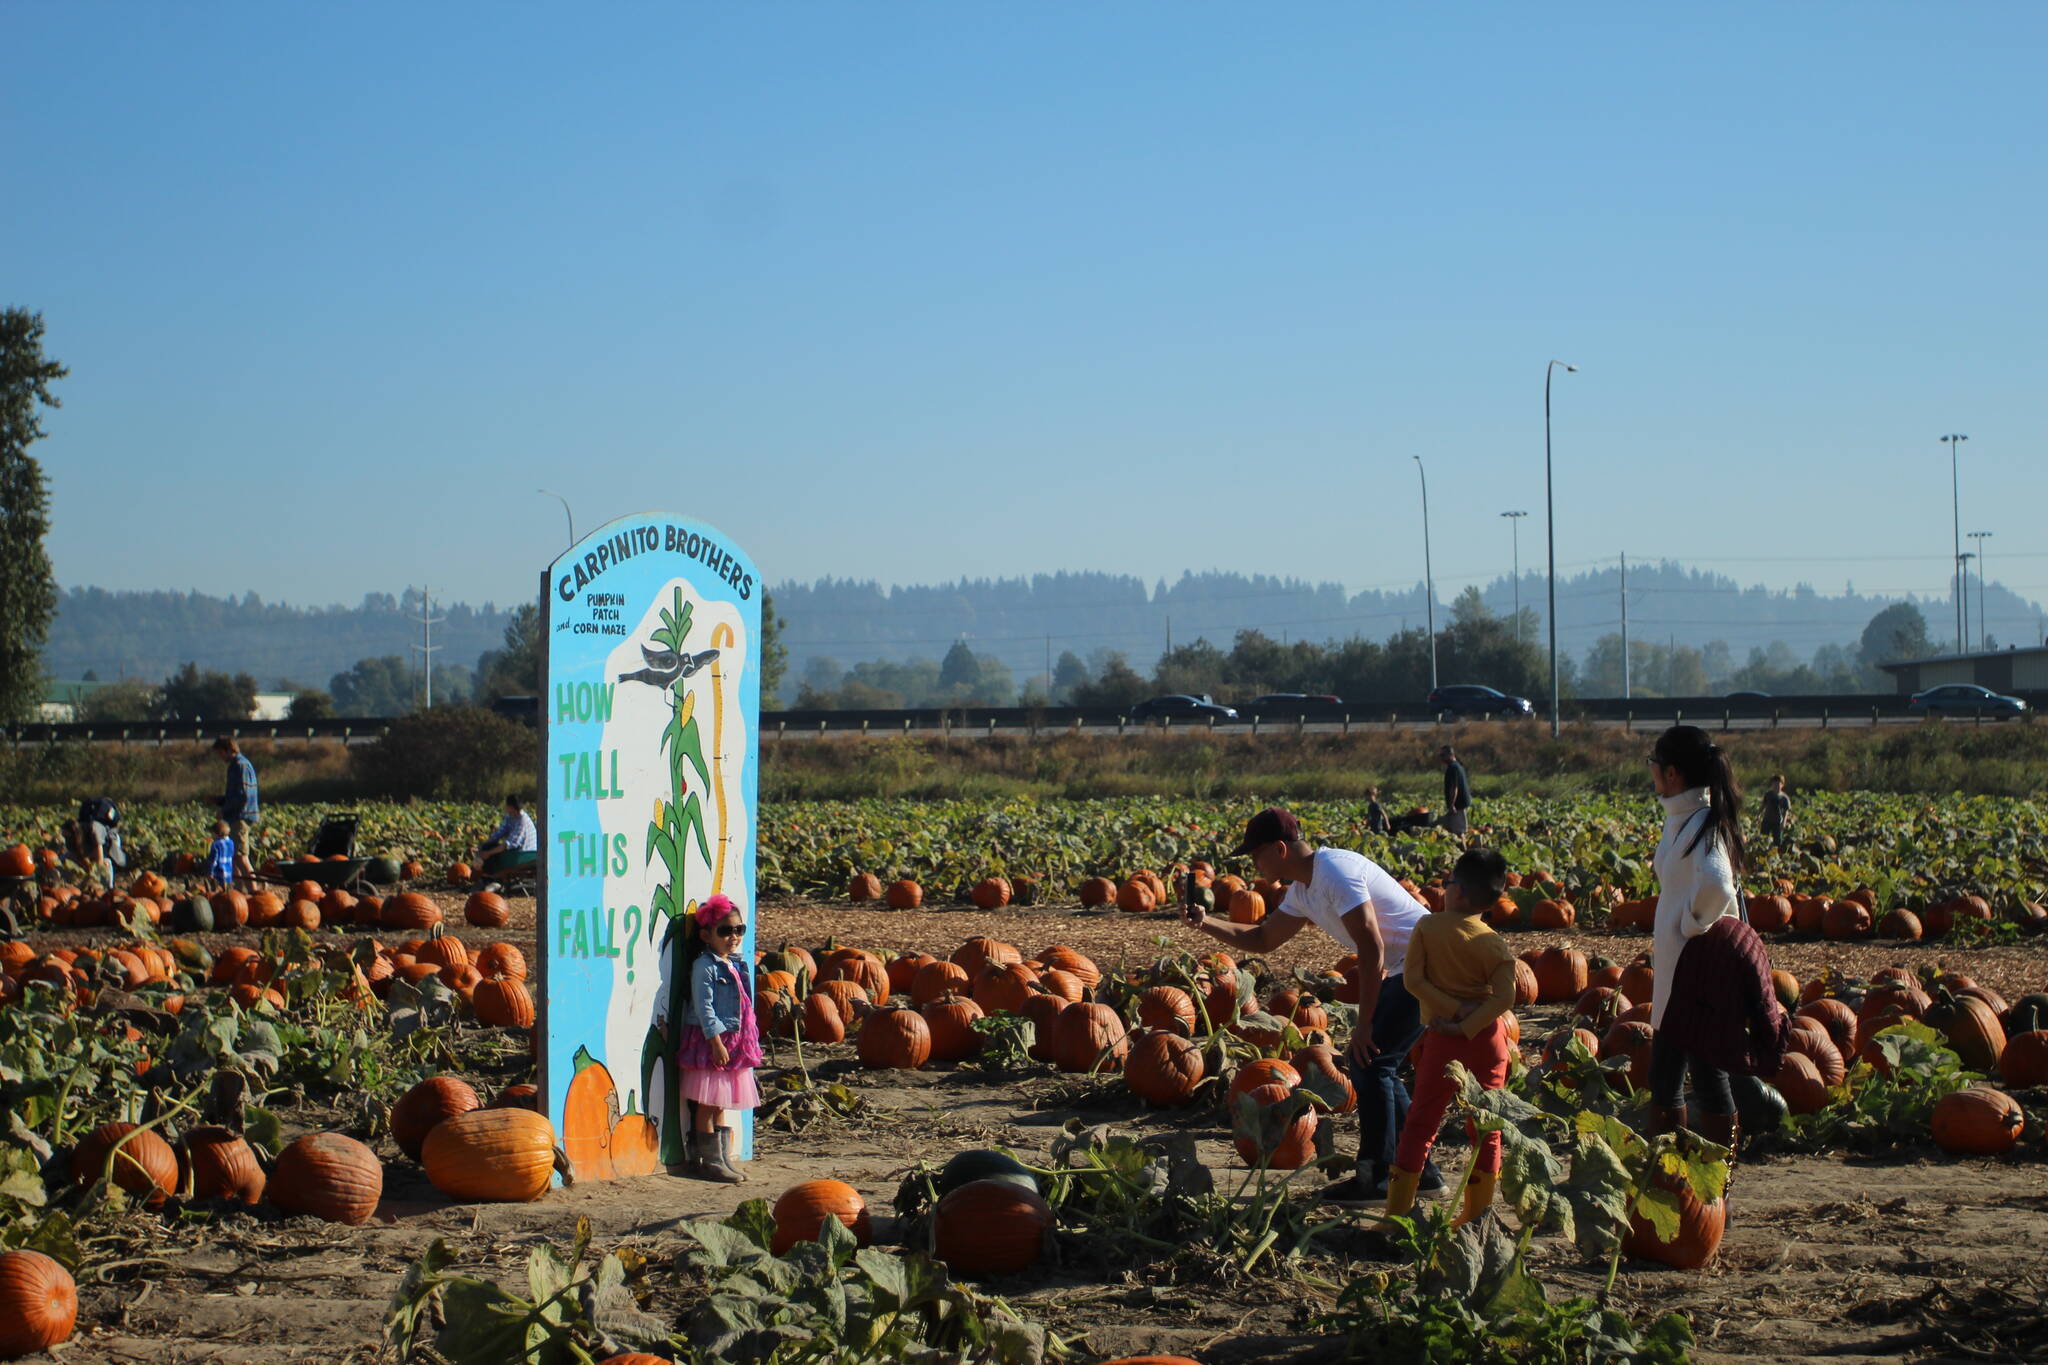 A family snaps a photo at the “How tall this fall?” measuring sign on Sunday, Oct. 16. Olivia Sullivan/Sound Publishing